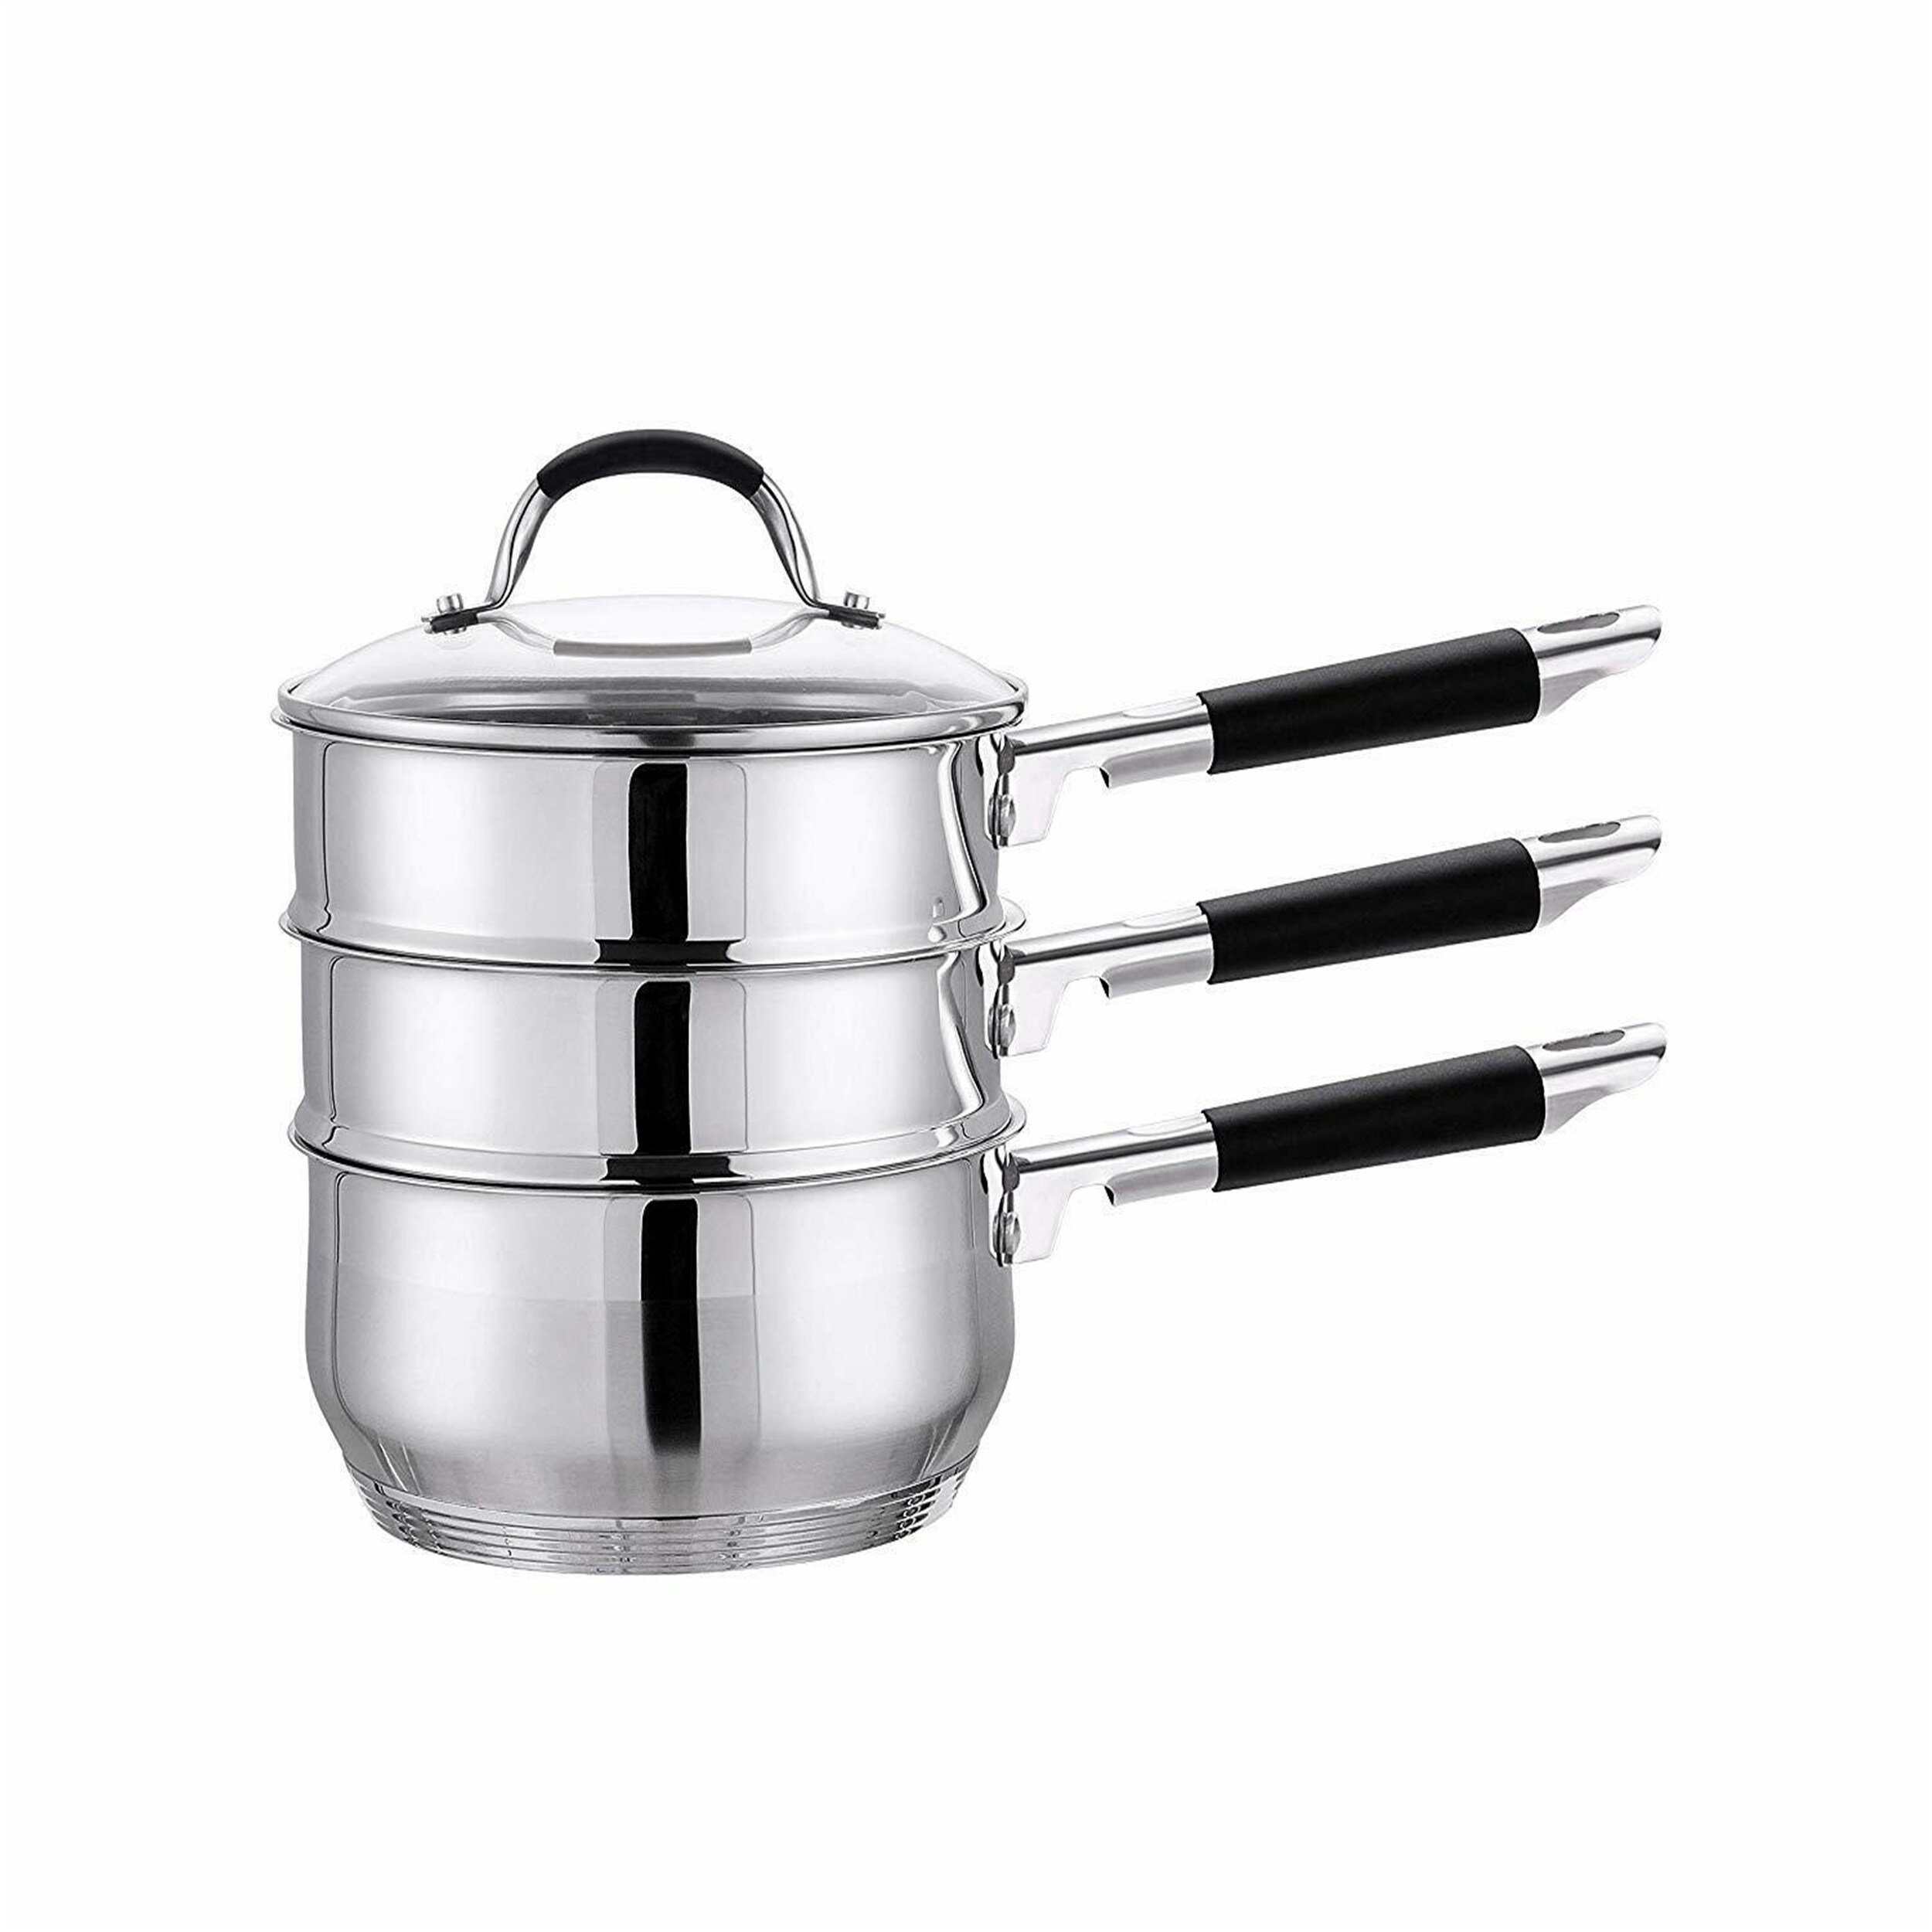 https://ak1.ostkcdn.com/images/products/is/images/direct/0009993ad749e739e17379fbe45751371f53bfc7/3-Quart-Stainless-Steel-Premium-Double-Boiler-Multi-Pot-Steamer-Cookware.jpg